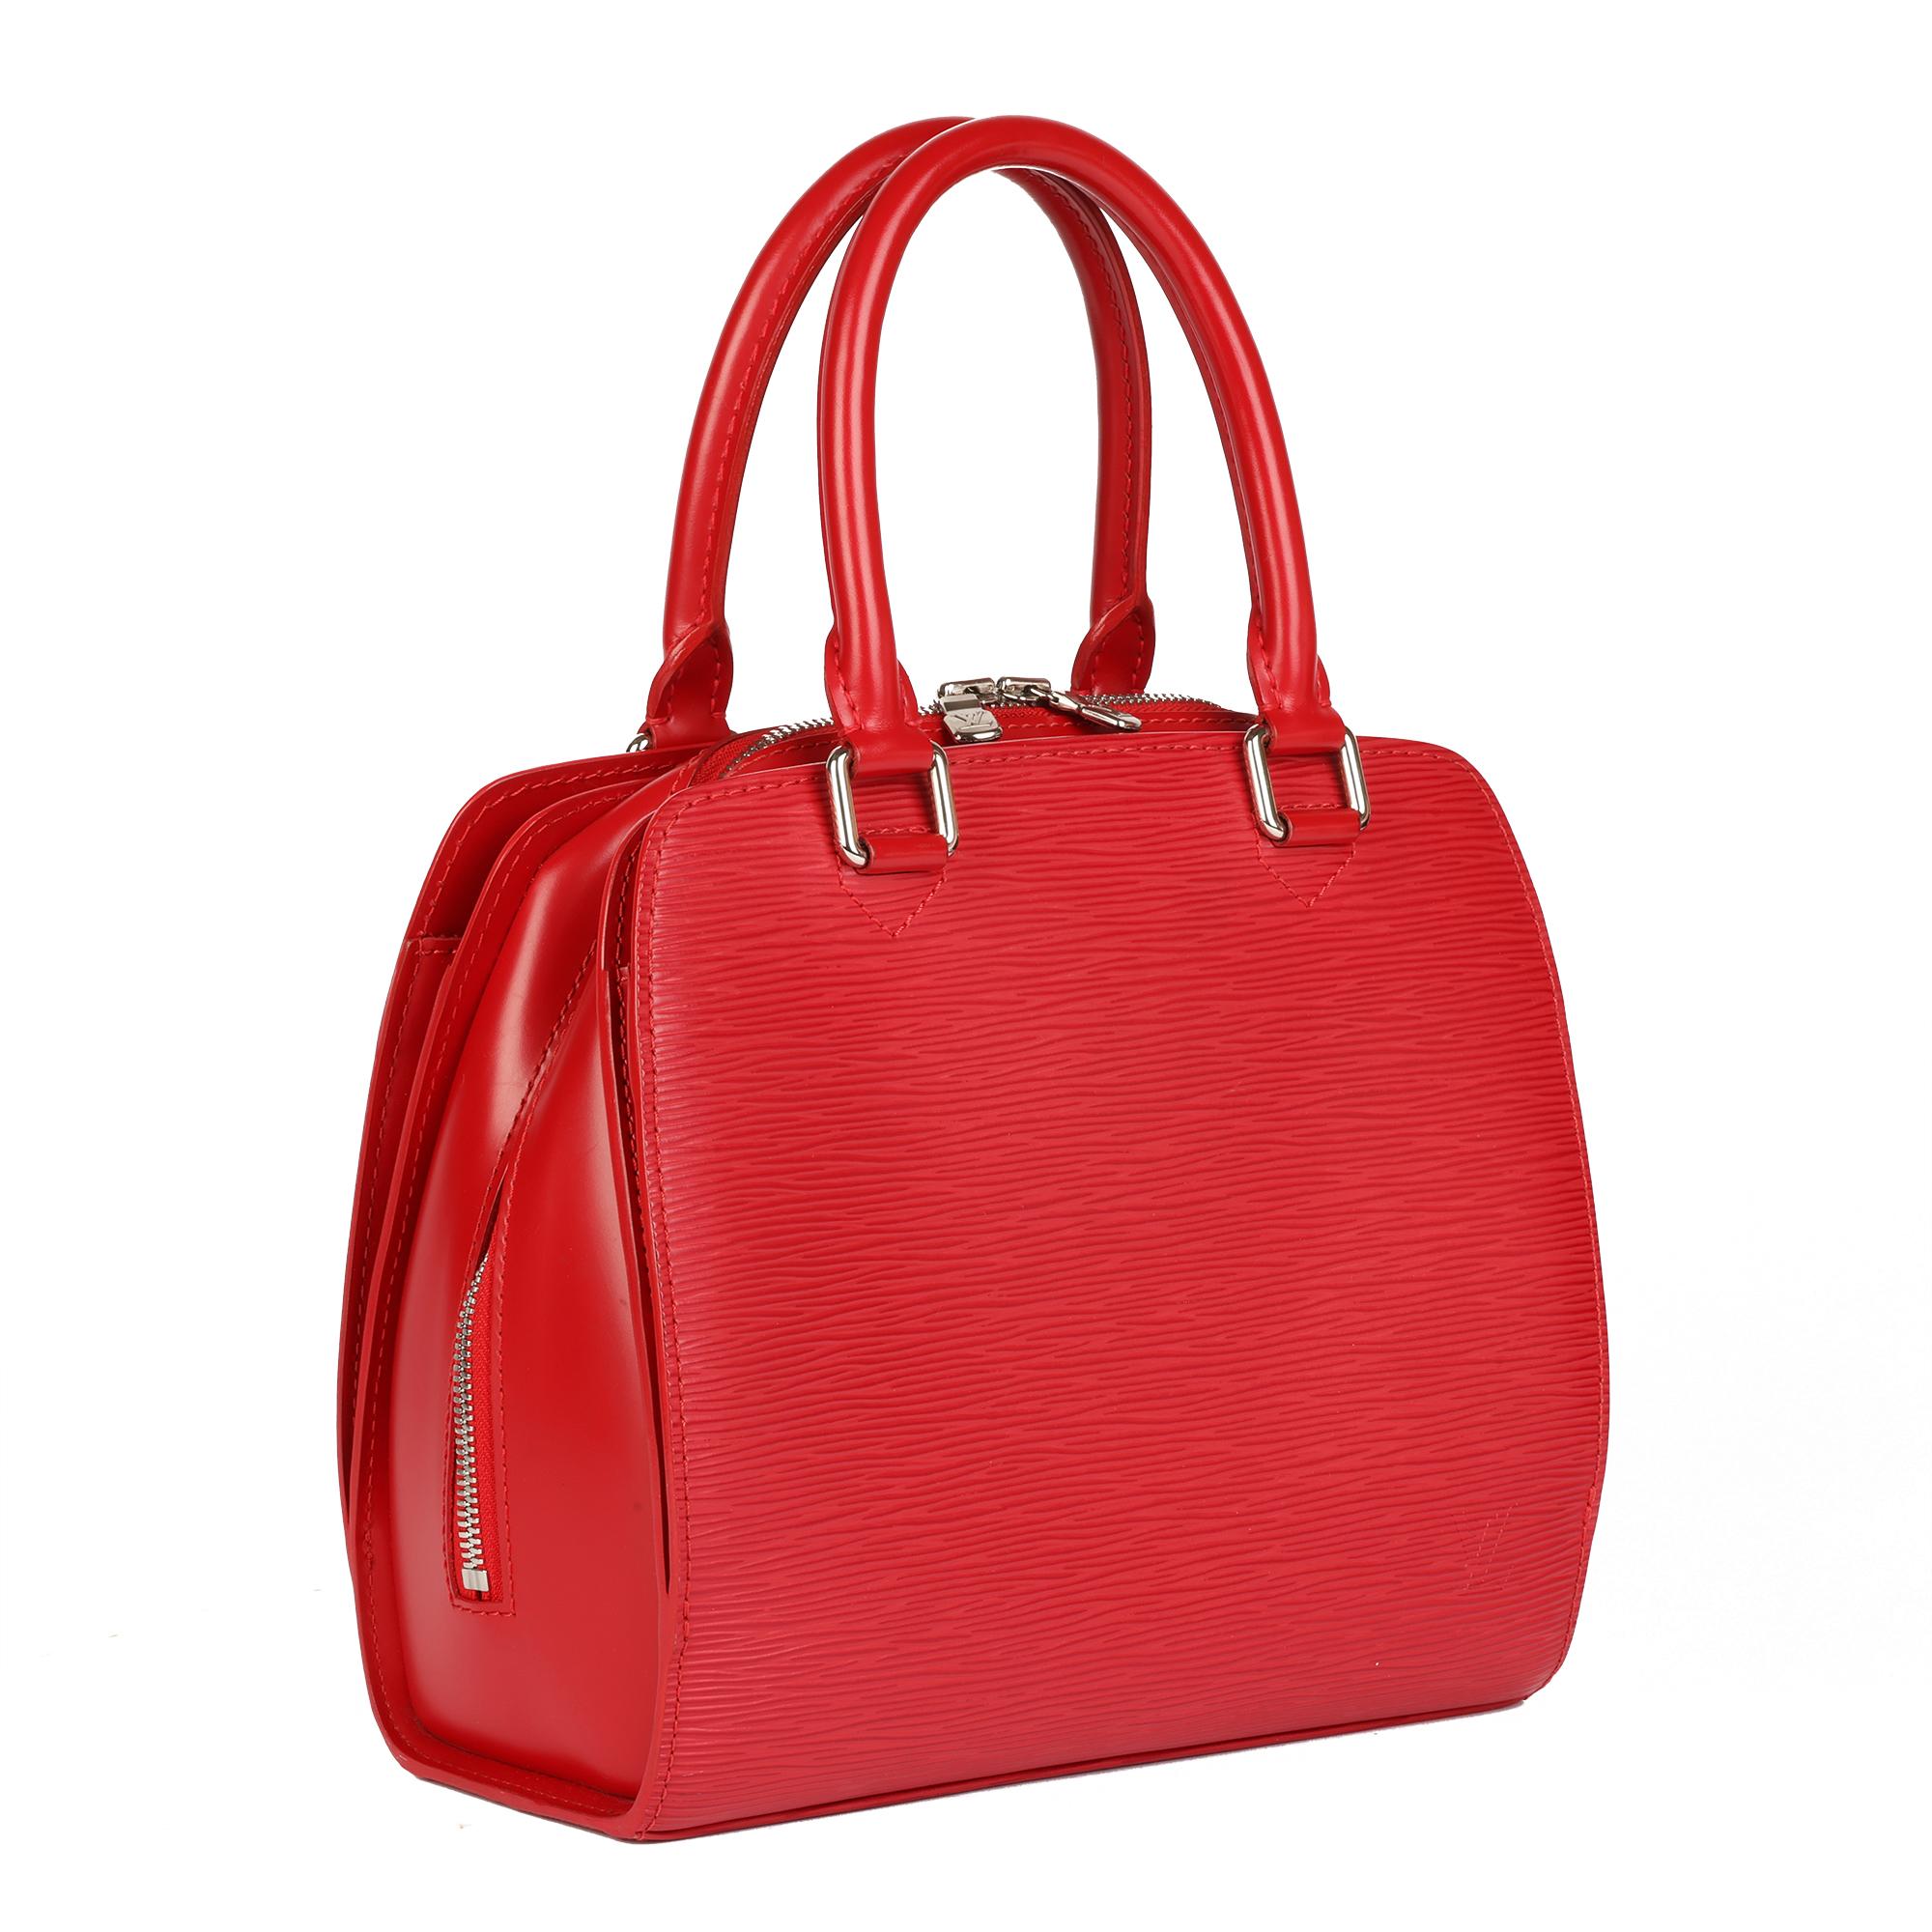 LOUIS VUITTON
Red Epi Leather Pont Neuf 

Xupes Reference: CB773
Serial Number: MI1015
Age (Circa): 2005
Accompanied By: Louis Vuitton Dust Bag
Authenticity Details: Date Stamp (Made in France)
Gender: Ladies
Type: Tote

Colour: Red
Hardware: